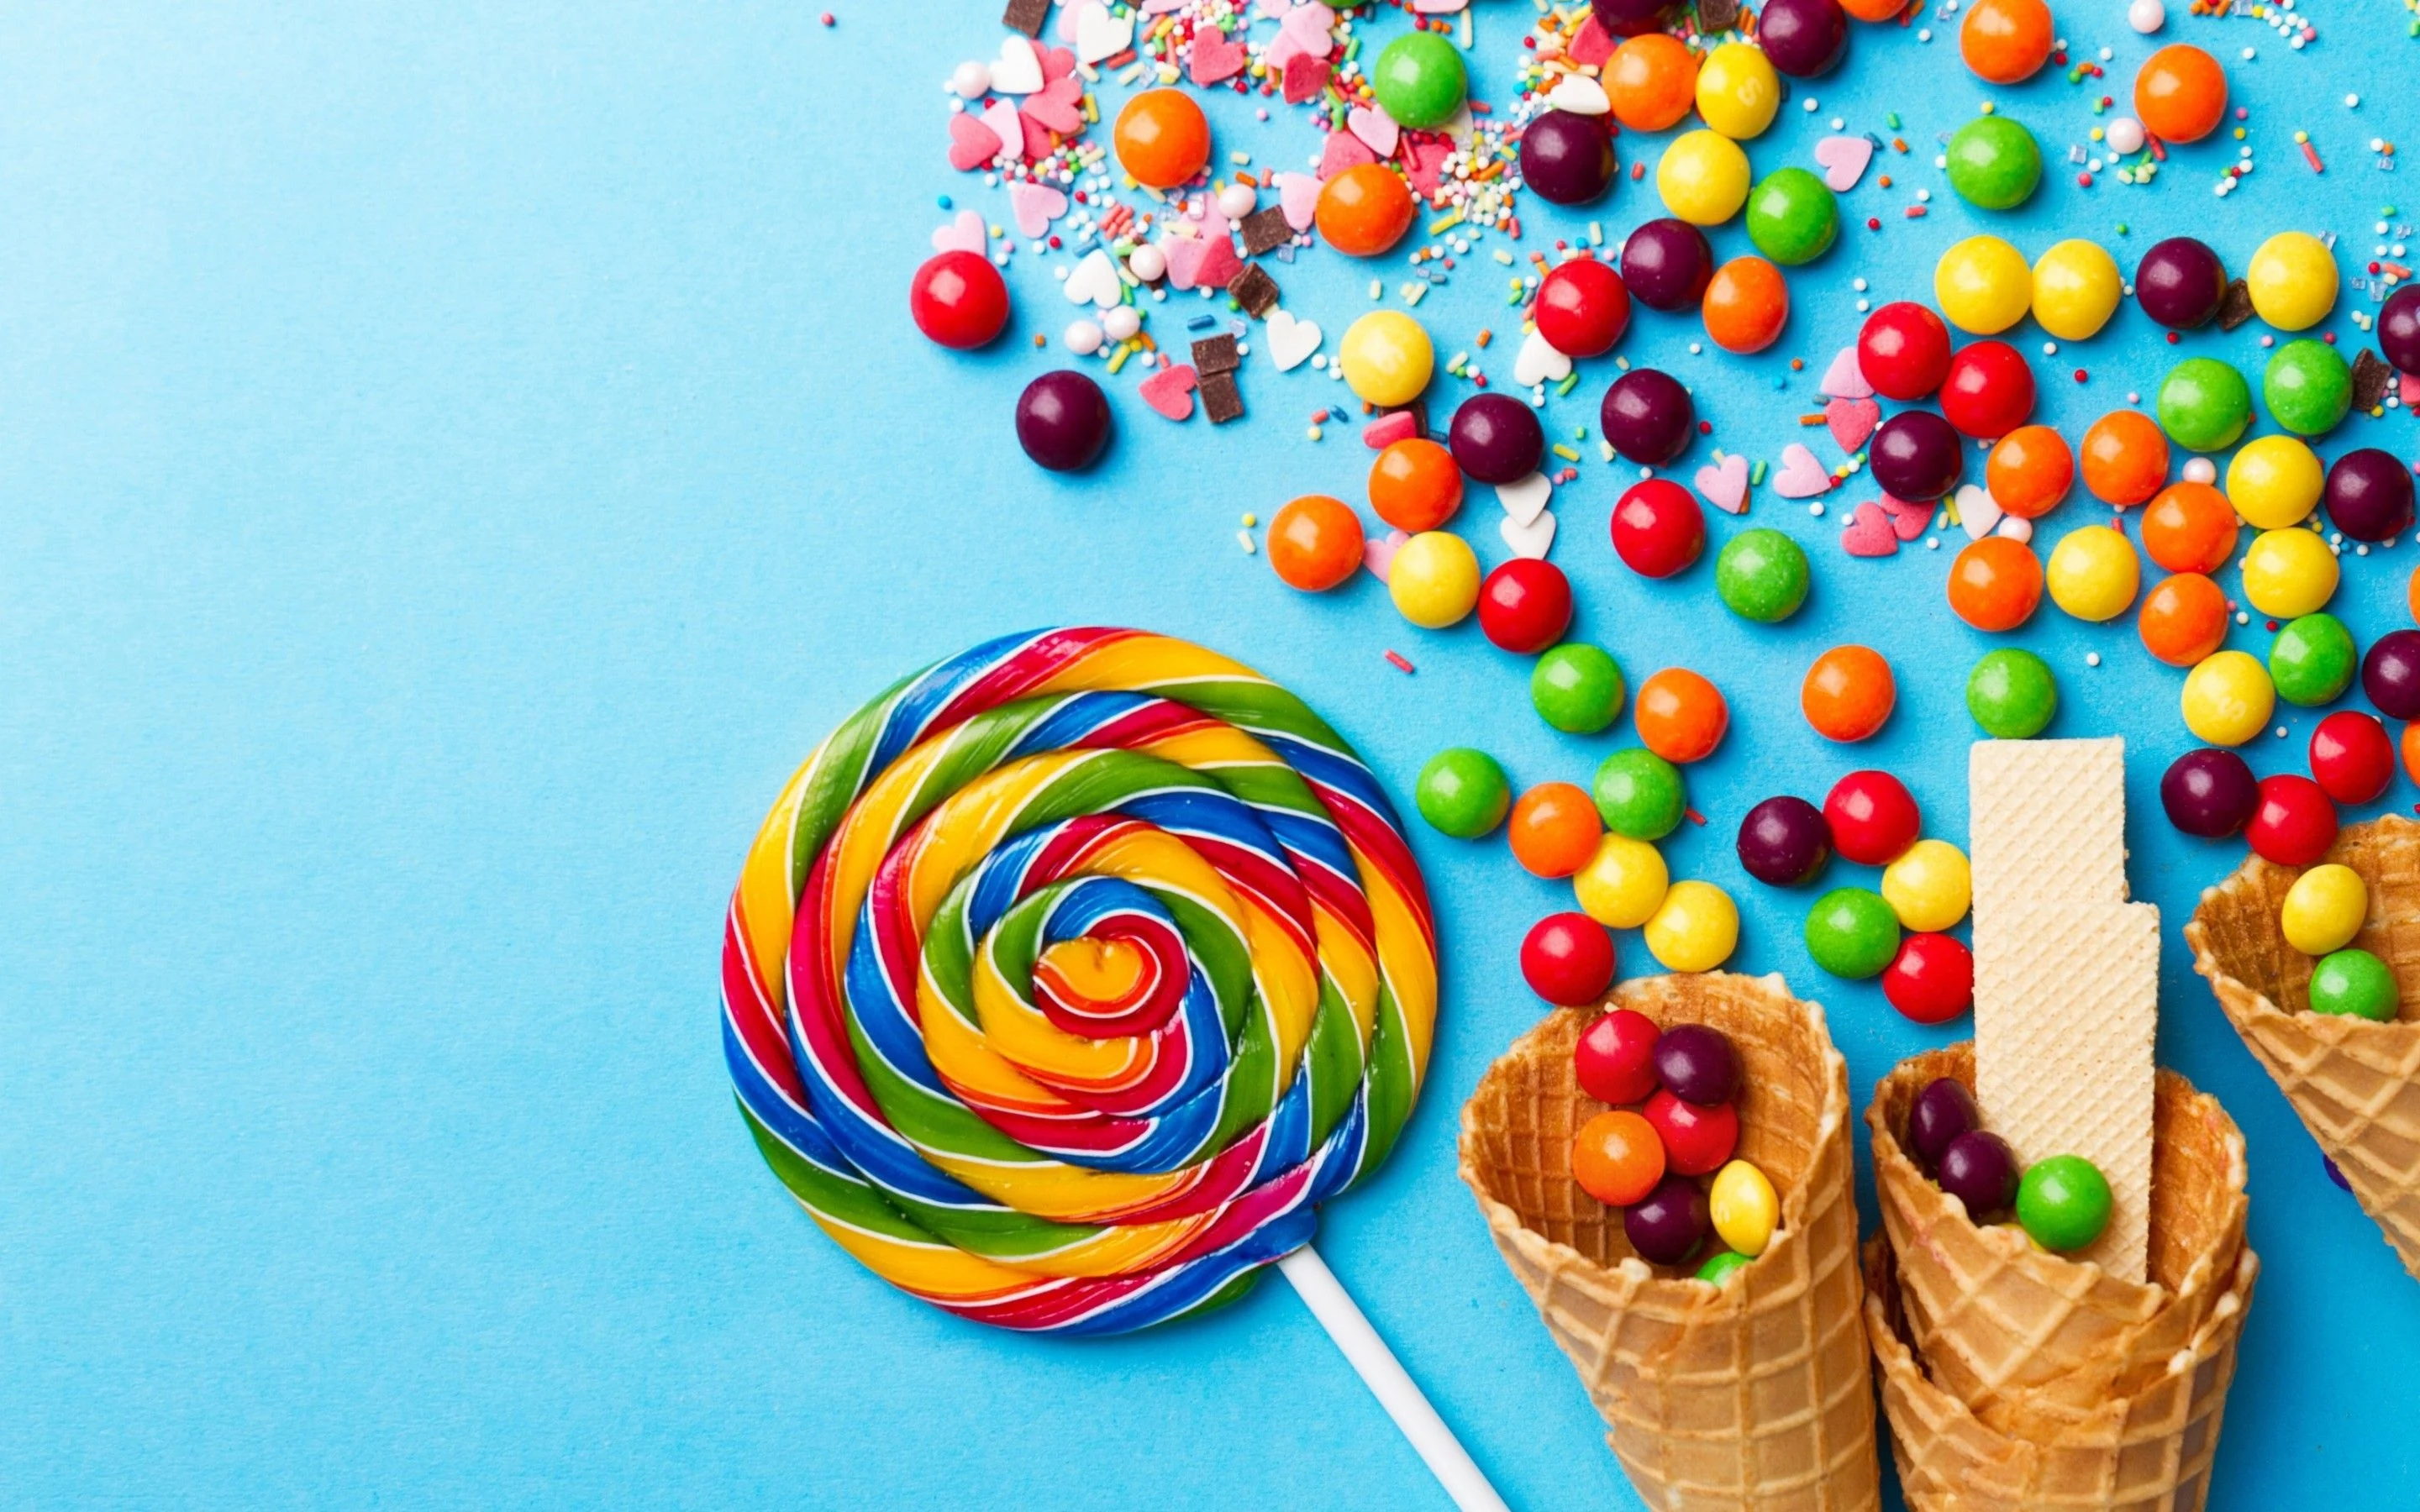 Candy-themed laptop wallpaper, Playful and colorful, Sweet indulgence, Eye-catching design, 2880x1800 HD Desktop